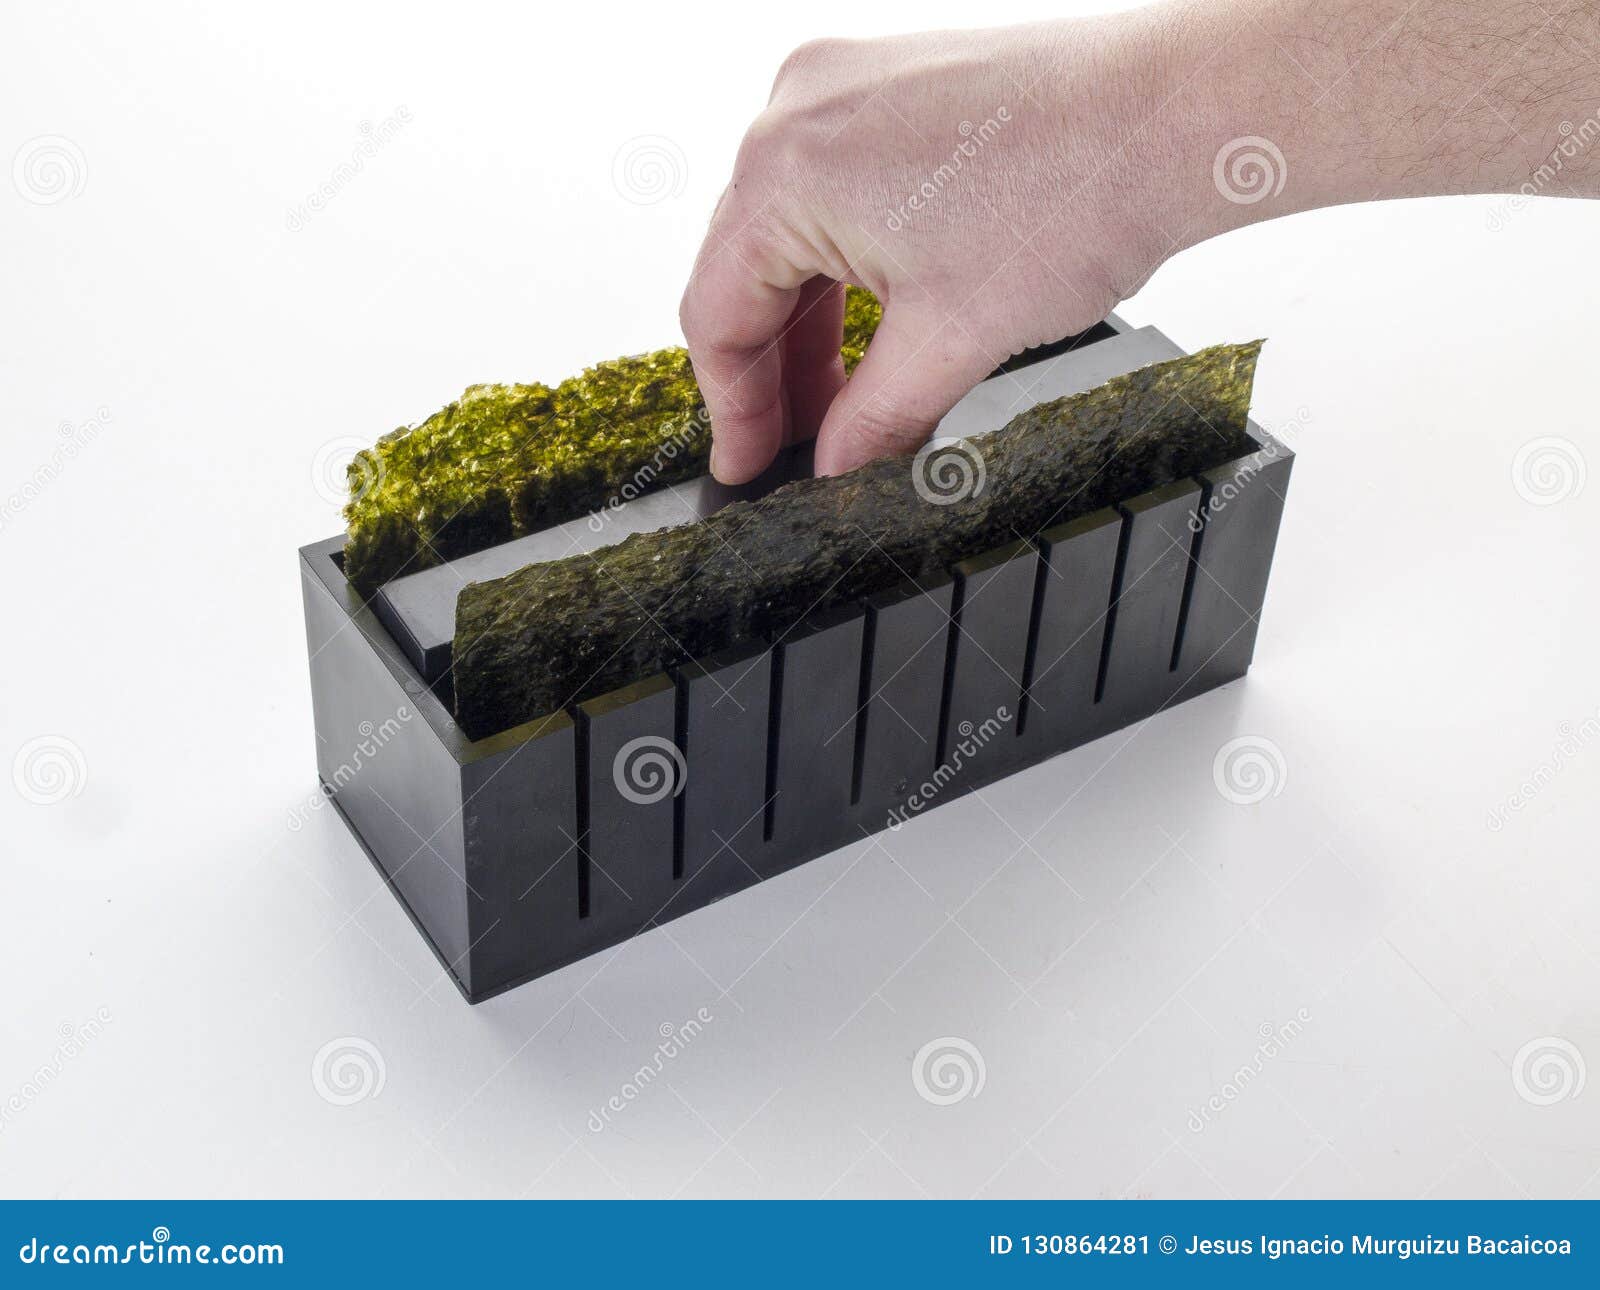 https://thumbs.dreamstime.com/z/squeezing-sushi-rice-inside-cutting-mold-squeezing-sushi-rice-inside-cut-mold-seen-white-surface-130864281.jpg